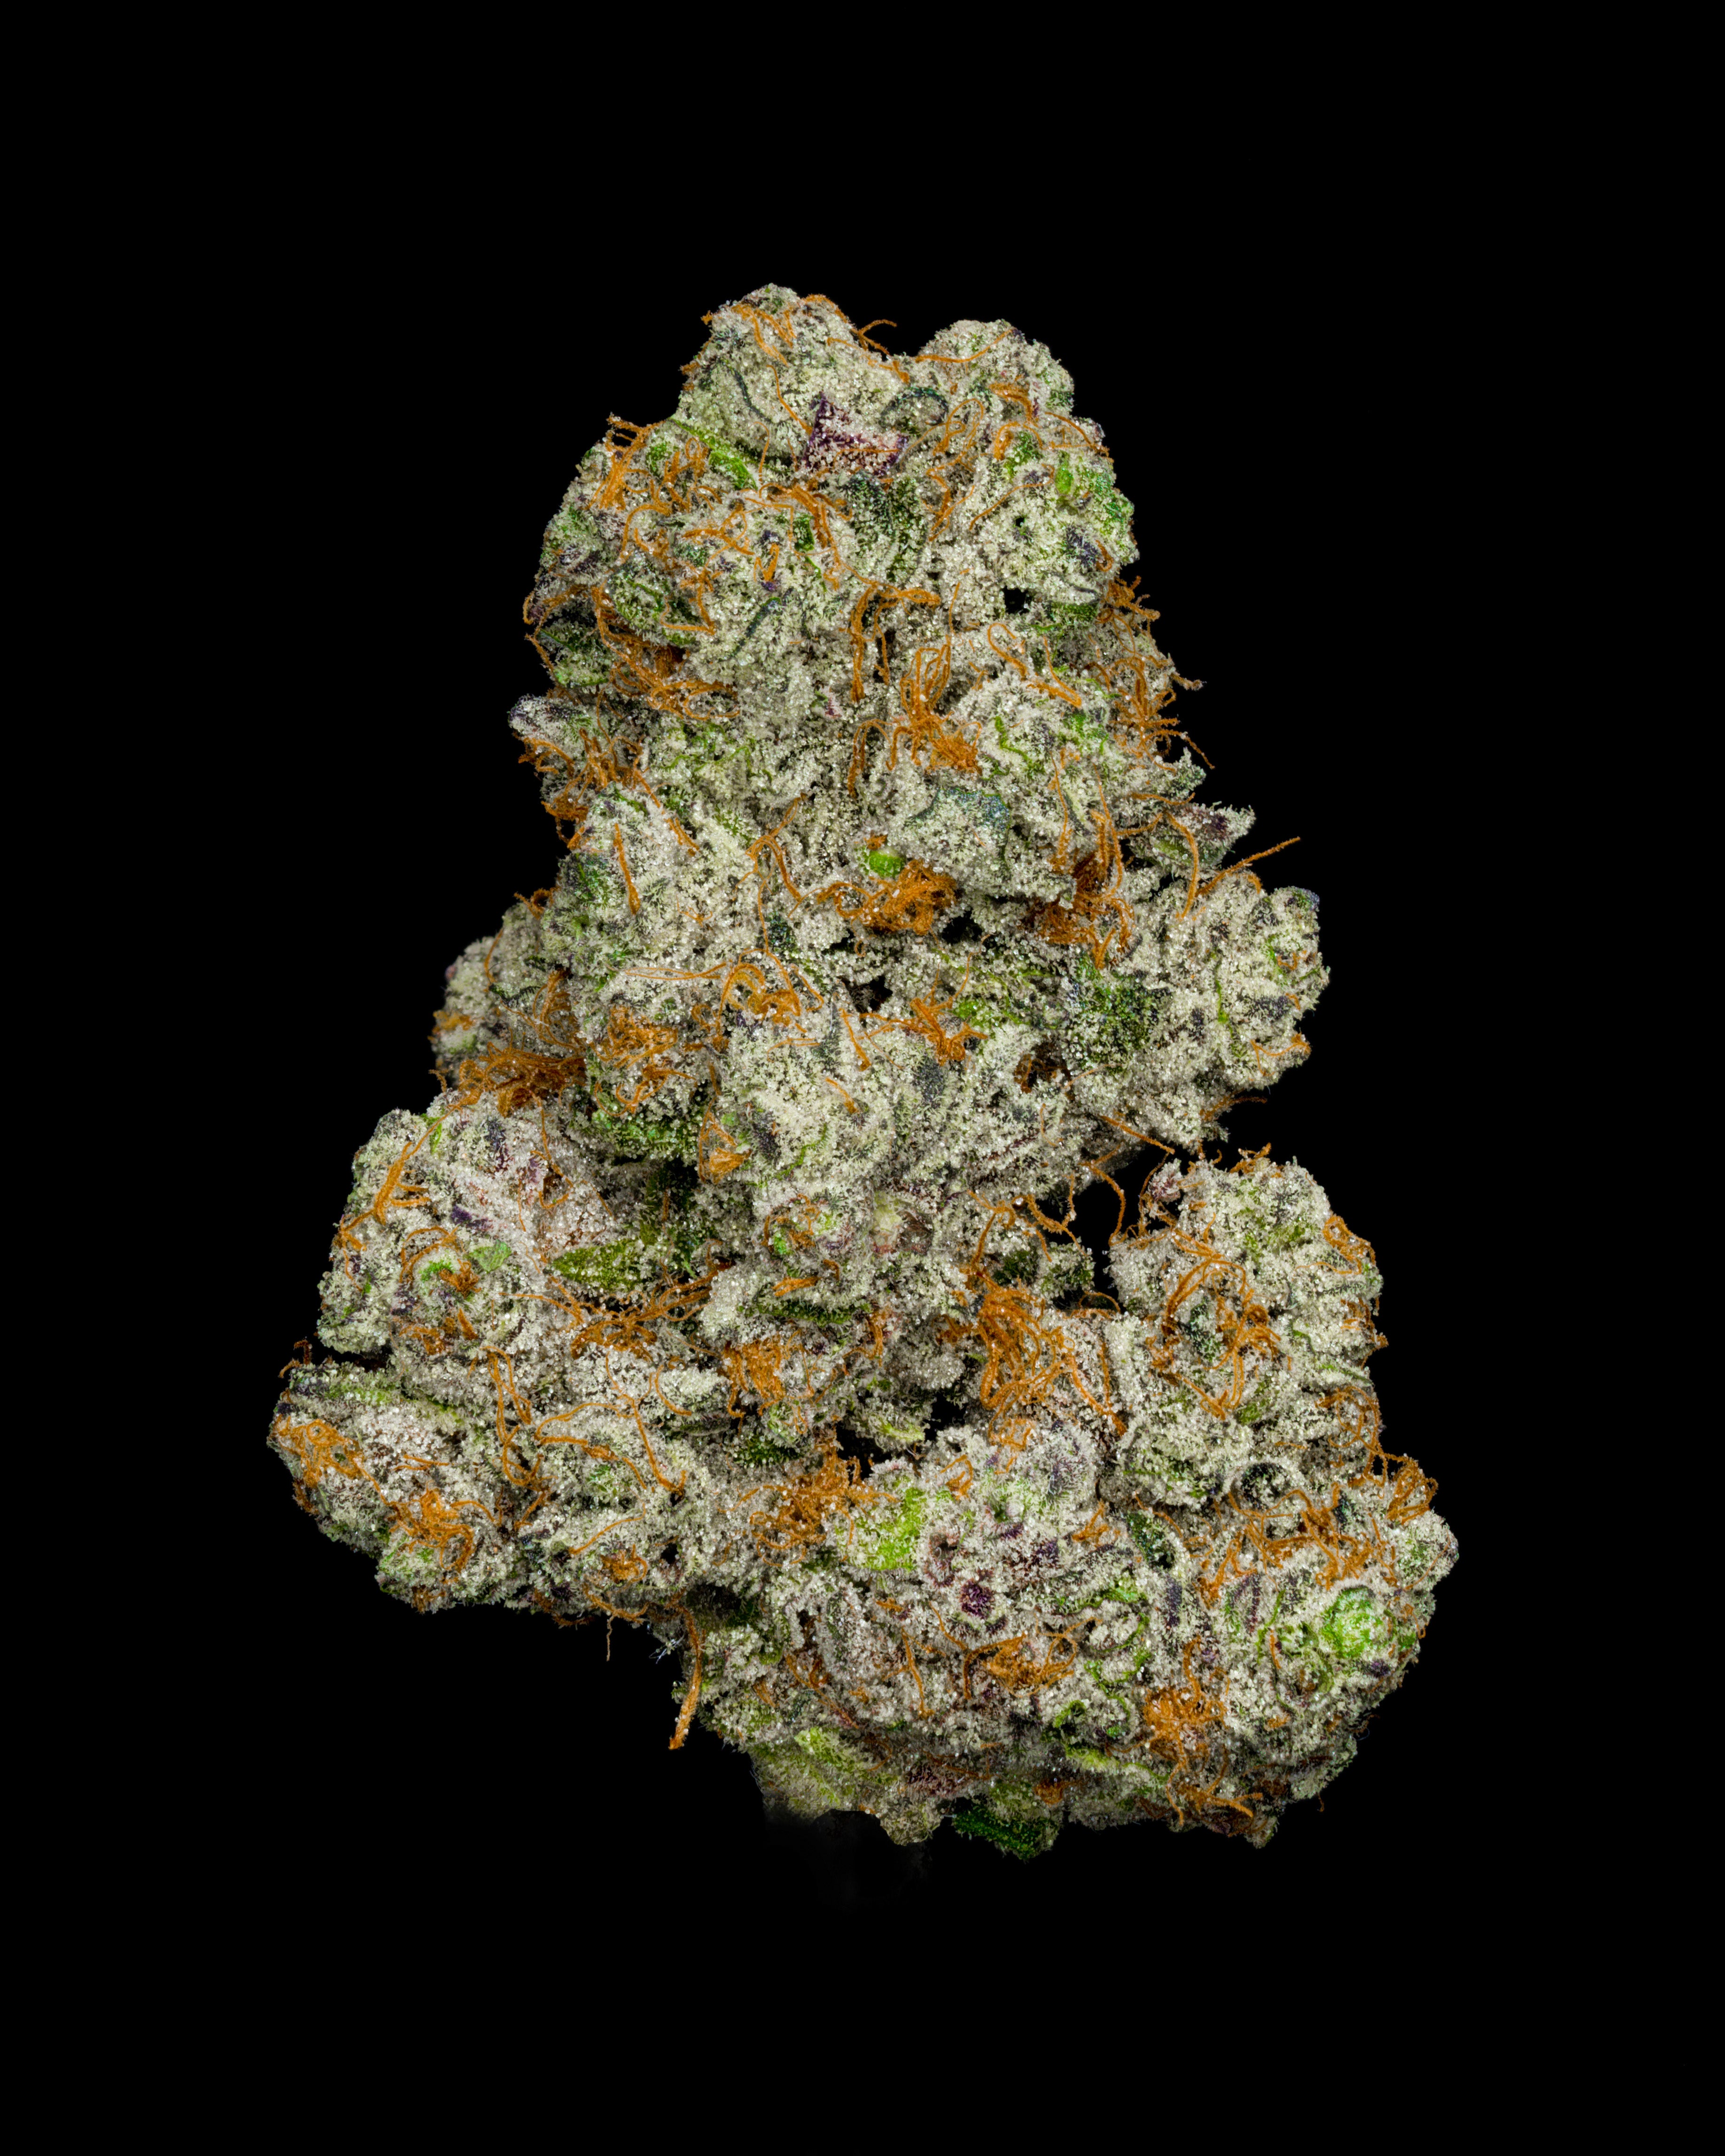 A nug of cannabis flower from the Girl Scout Cookies weed strain sits against a black background.